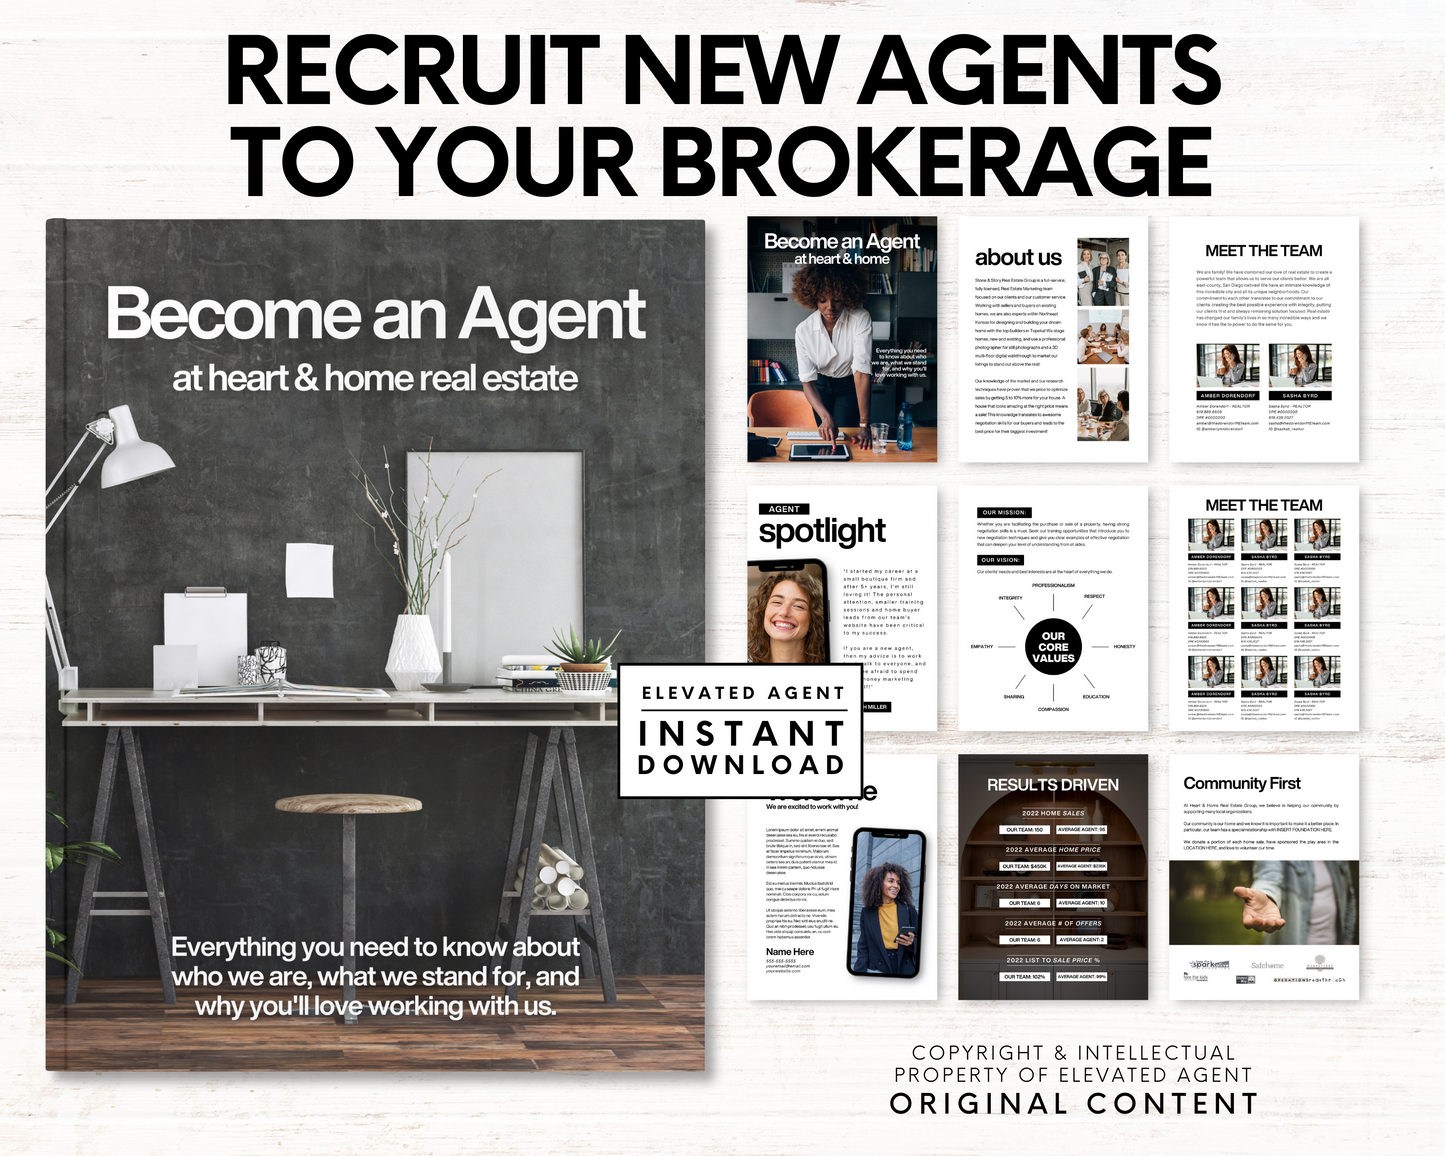 Real Estate Agent Recruiting Guide - Classic Brand Style